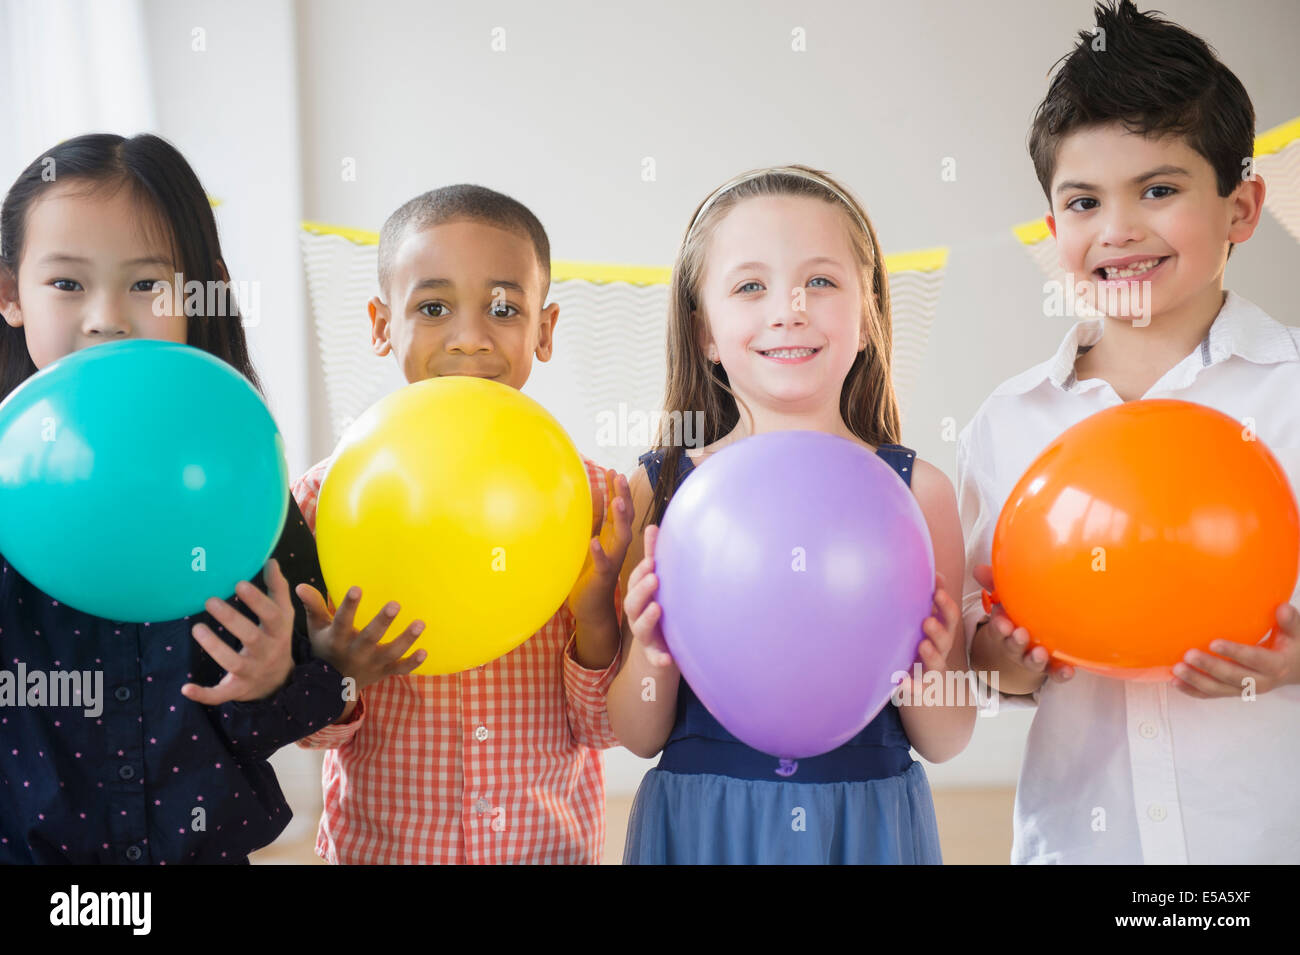 Enfants holding colorful balloons at party Banque D'Images